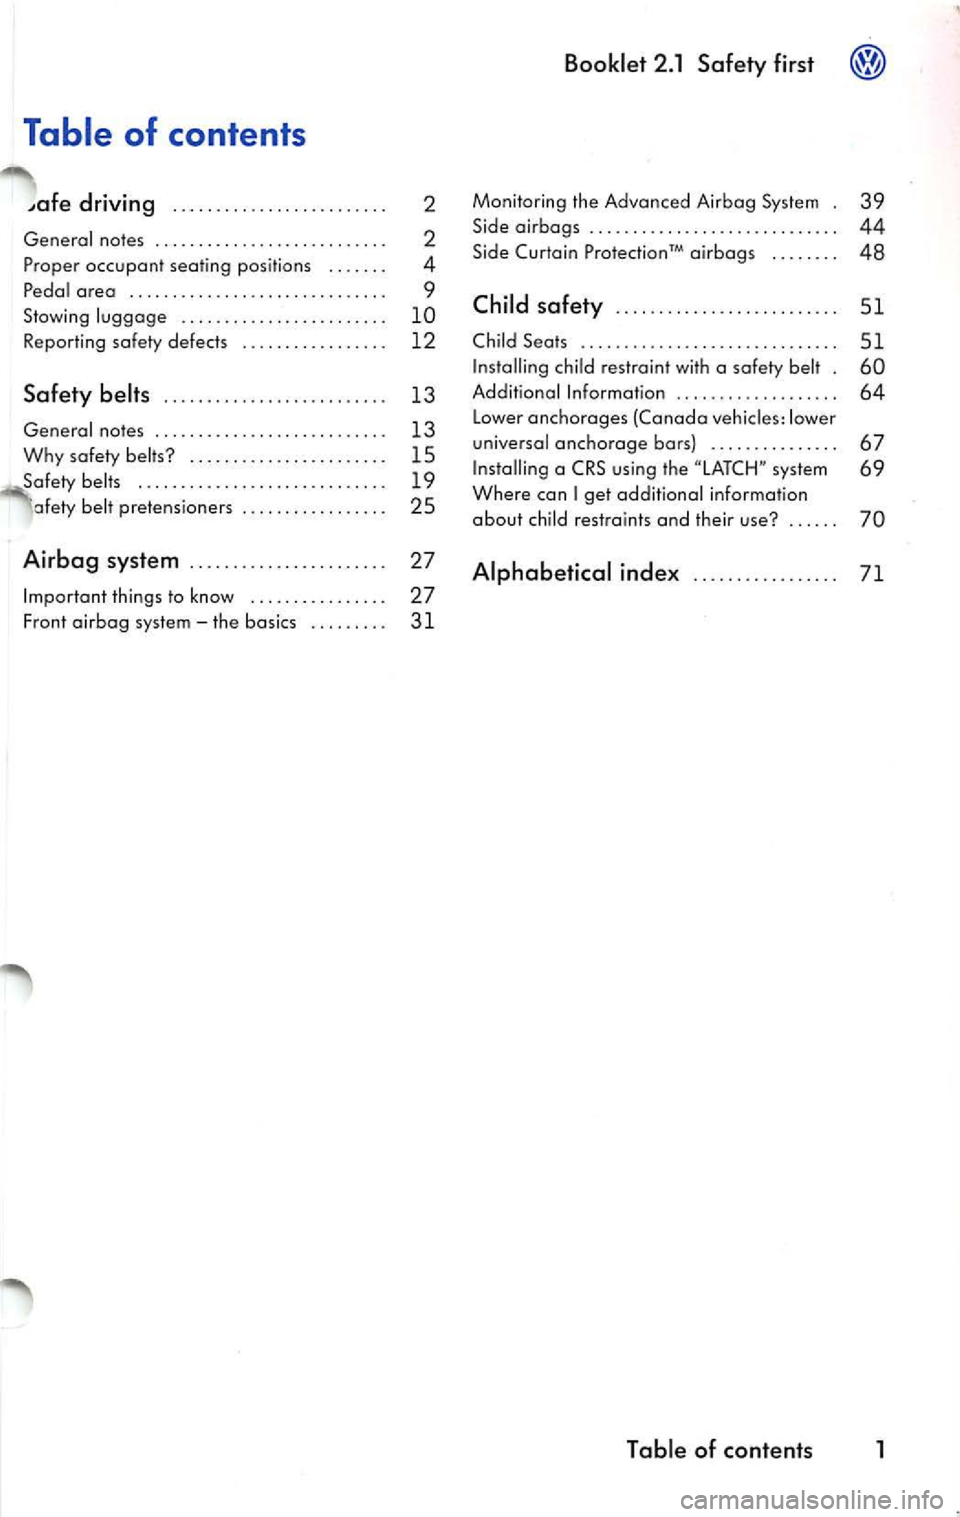 VOLKSWAGEN JETTA 2007  Owners Manual Table  of  contents 
driving . .  . . . .  .  . .  . .  . .  . . .  . . . . . .  . . . 2 
General  notes  . . . .  . . . .  . . . . .  . . .  . . .  .  . . . .  . .  .  2 
Pr oper  occupant  seating  